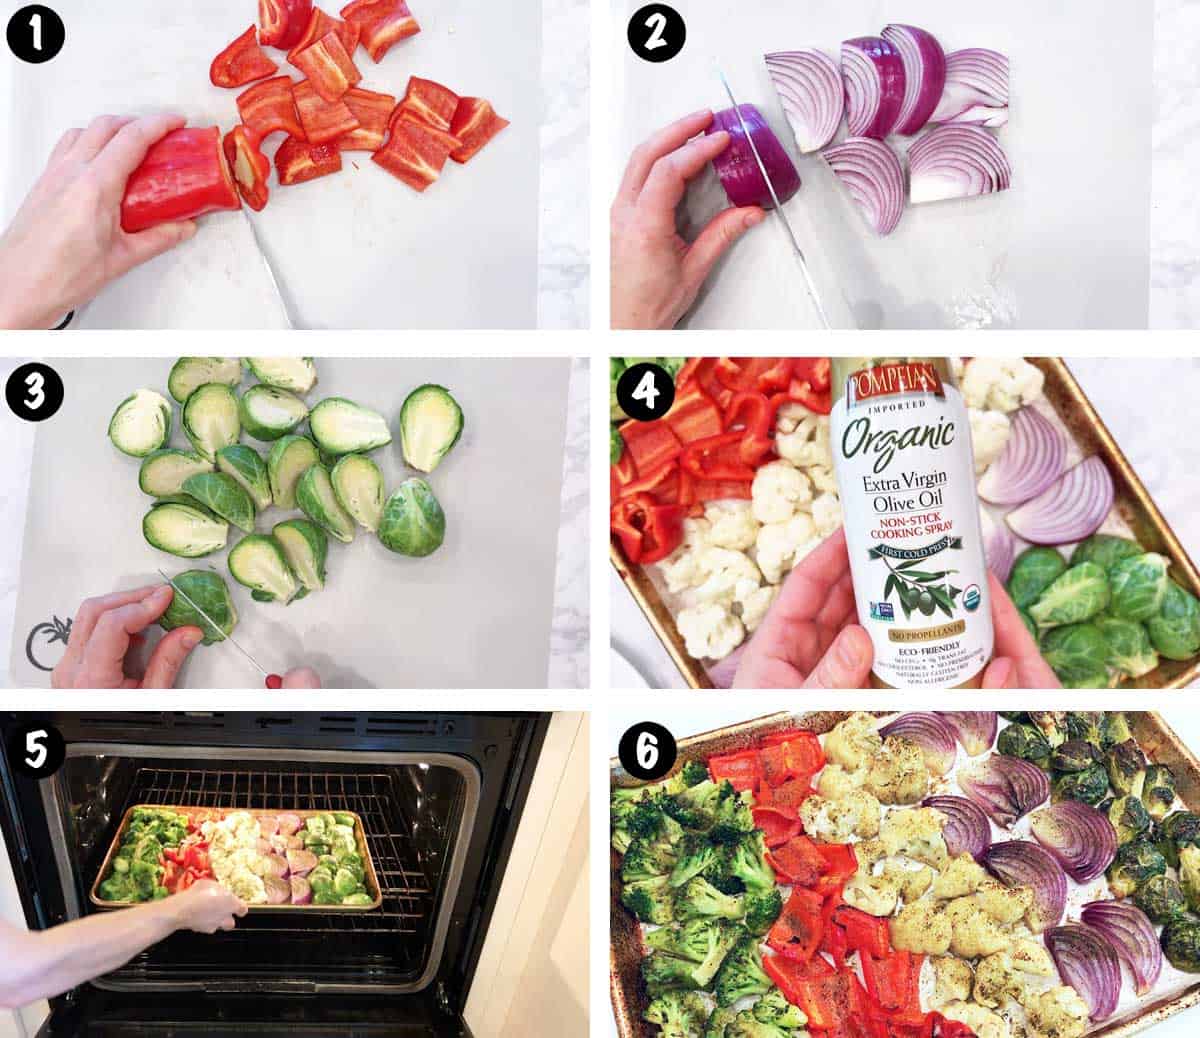 A six-photo collage showing how to roast vegetables in the oven.